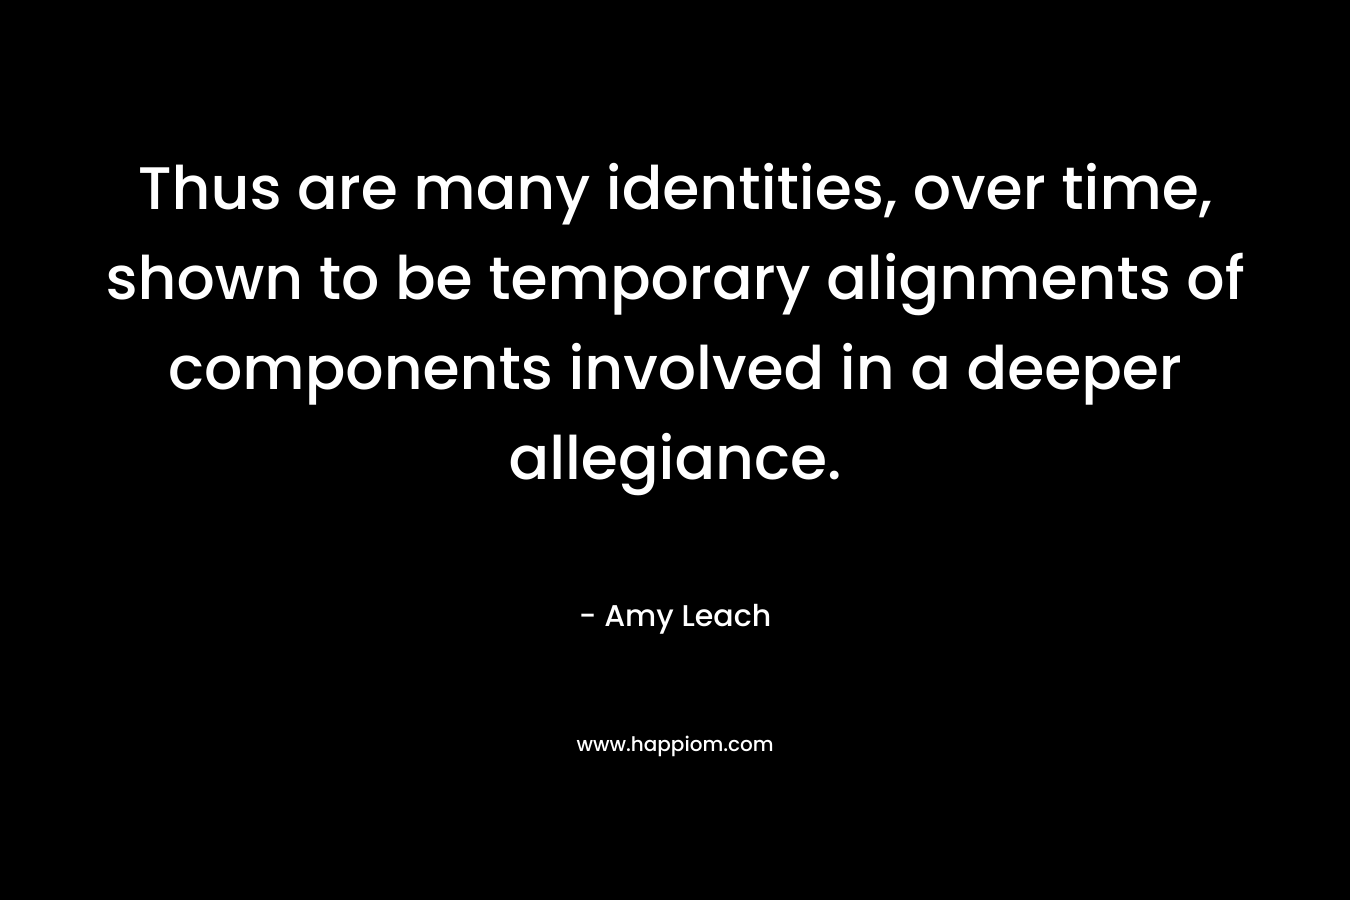 Thus are many identities, over time, shown to be temporary alignments of components involved in a deeper allegiance.